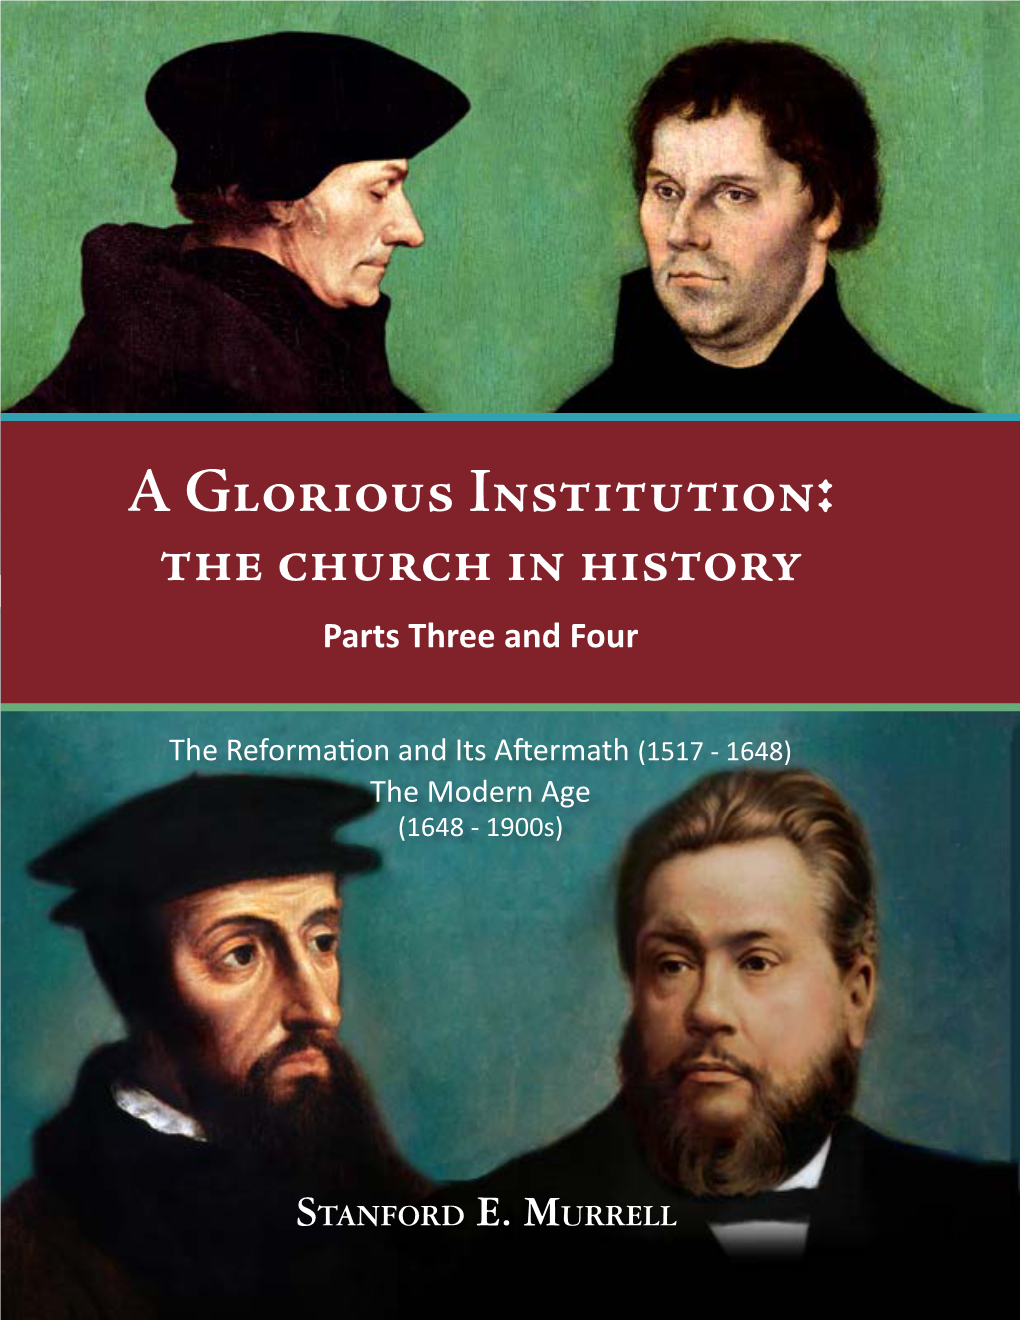 A Glorious Institution: the Church in History Parts Three and Four